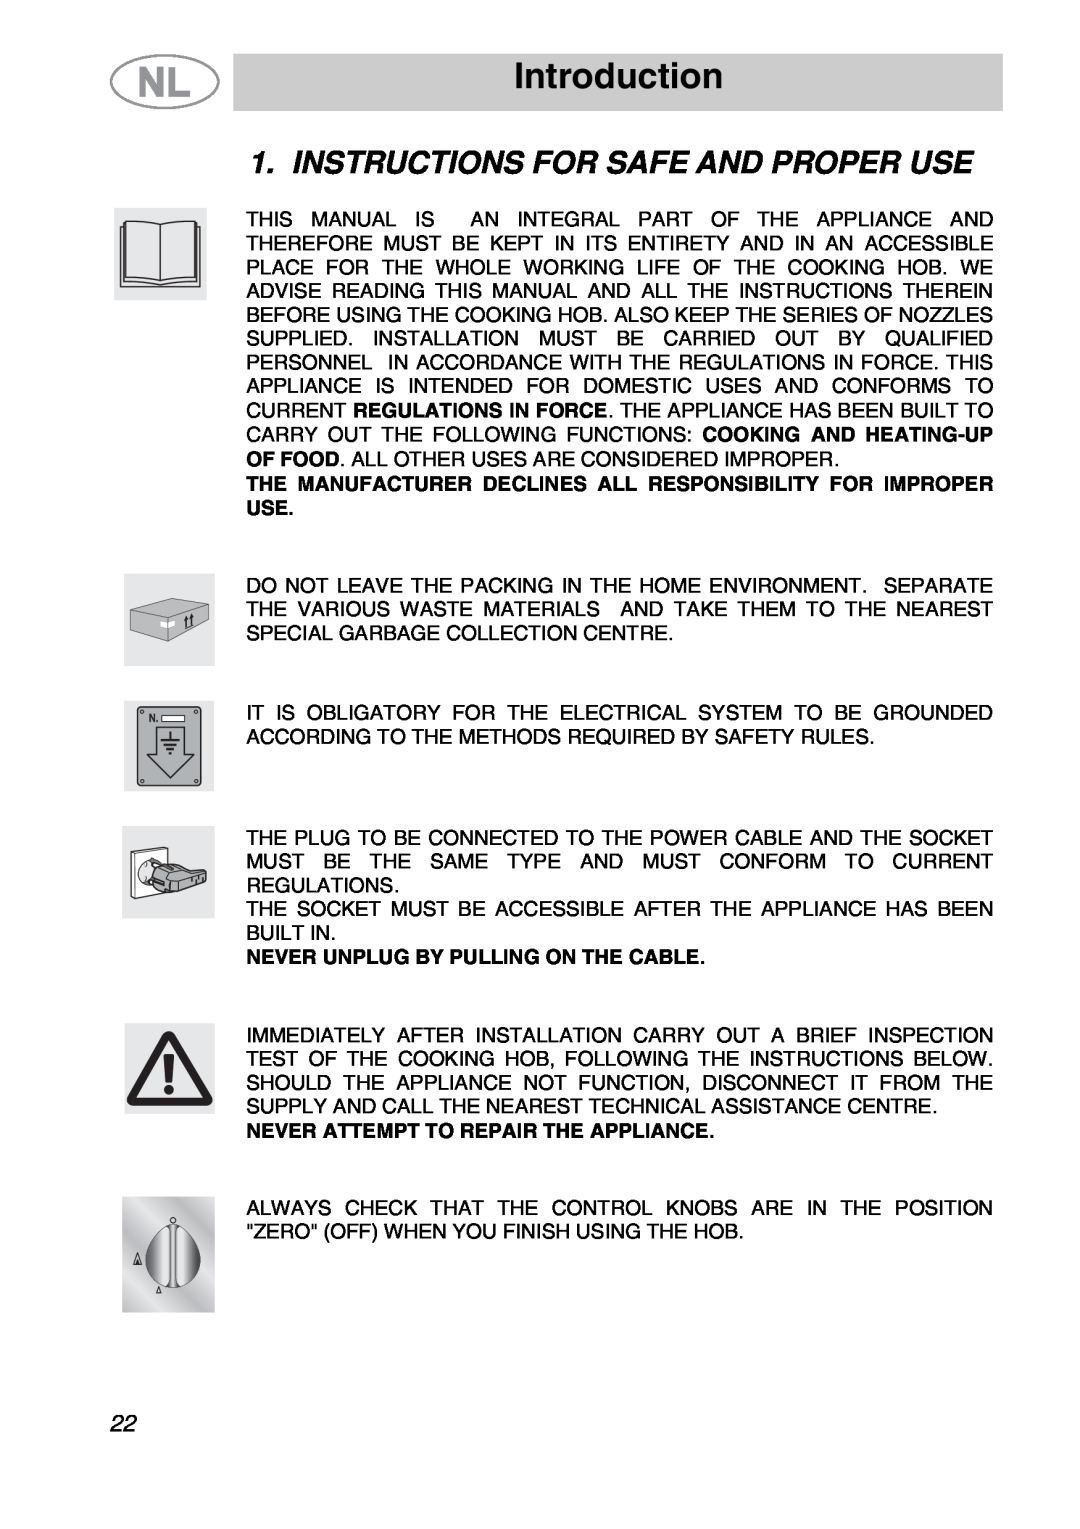 Smeg GKDCO15, GKCO64-3 manual Introduction, Instructions For Safe And Proper Use, Never Unplug By Pulling On The Cable 